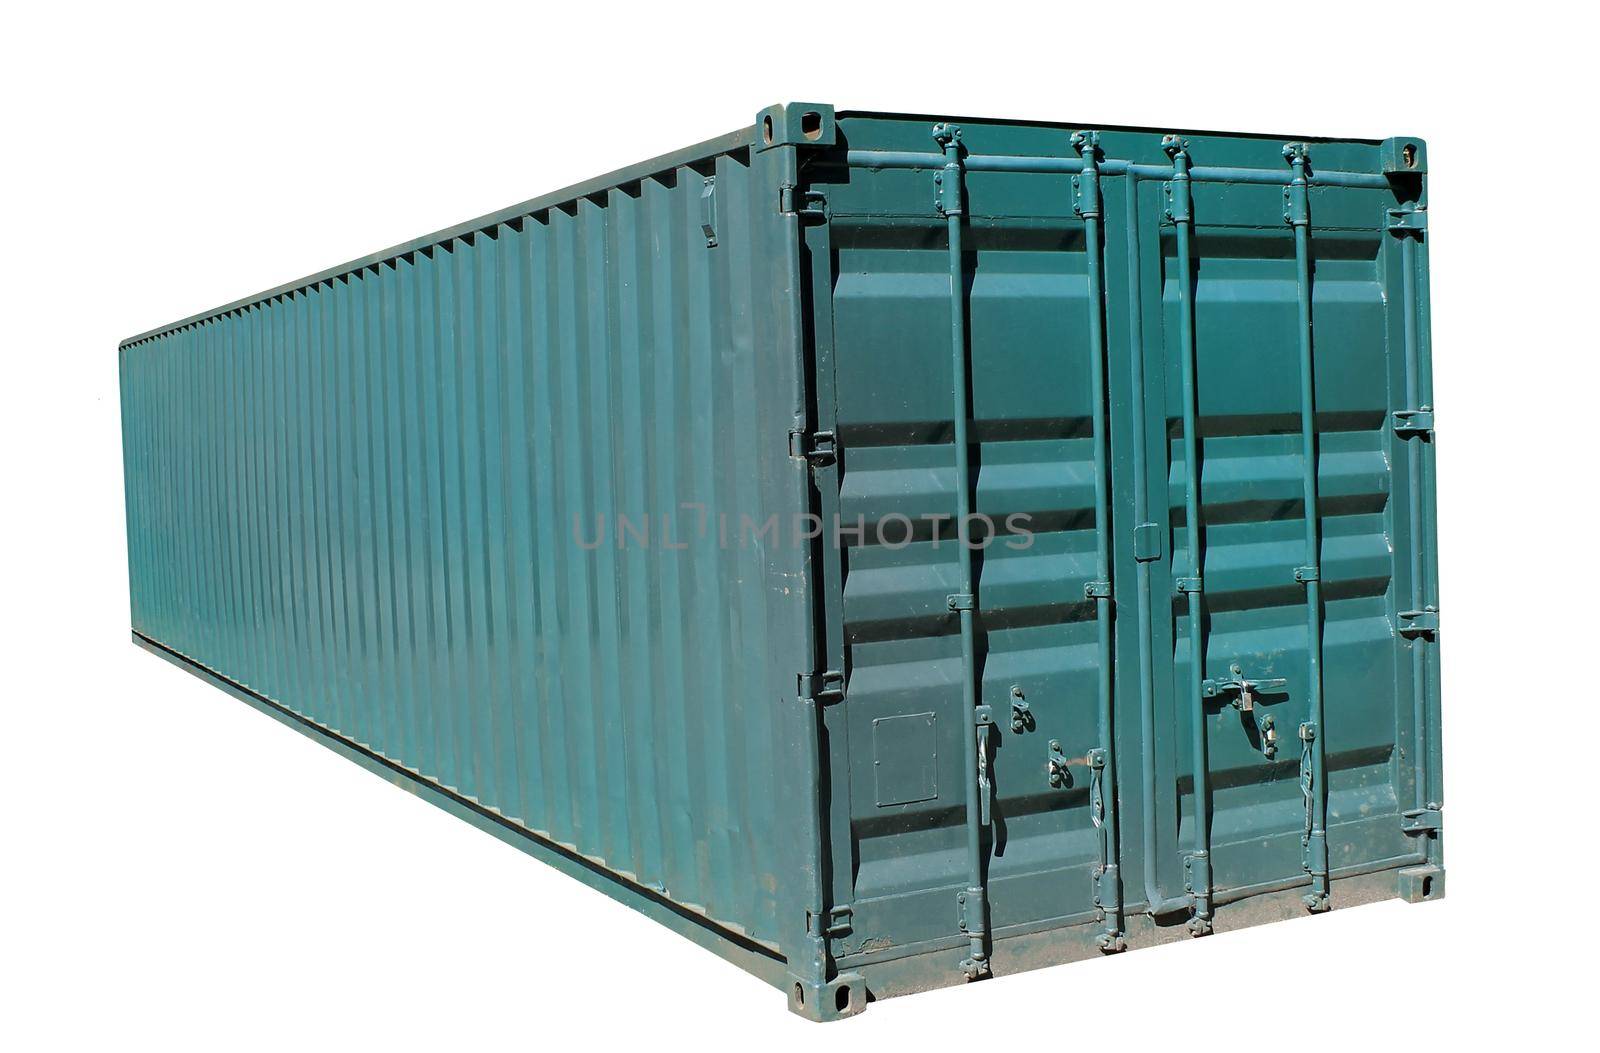 Shipping container by speedfighter